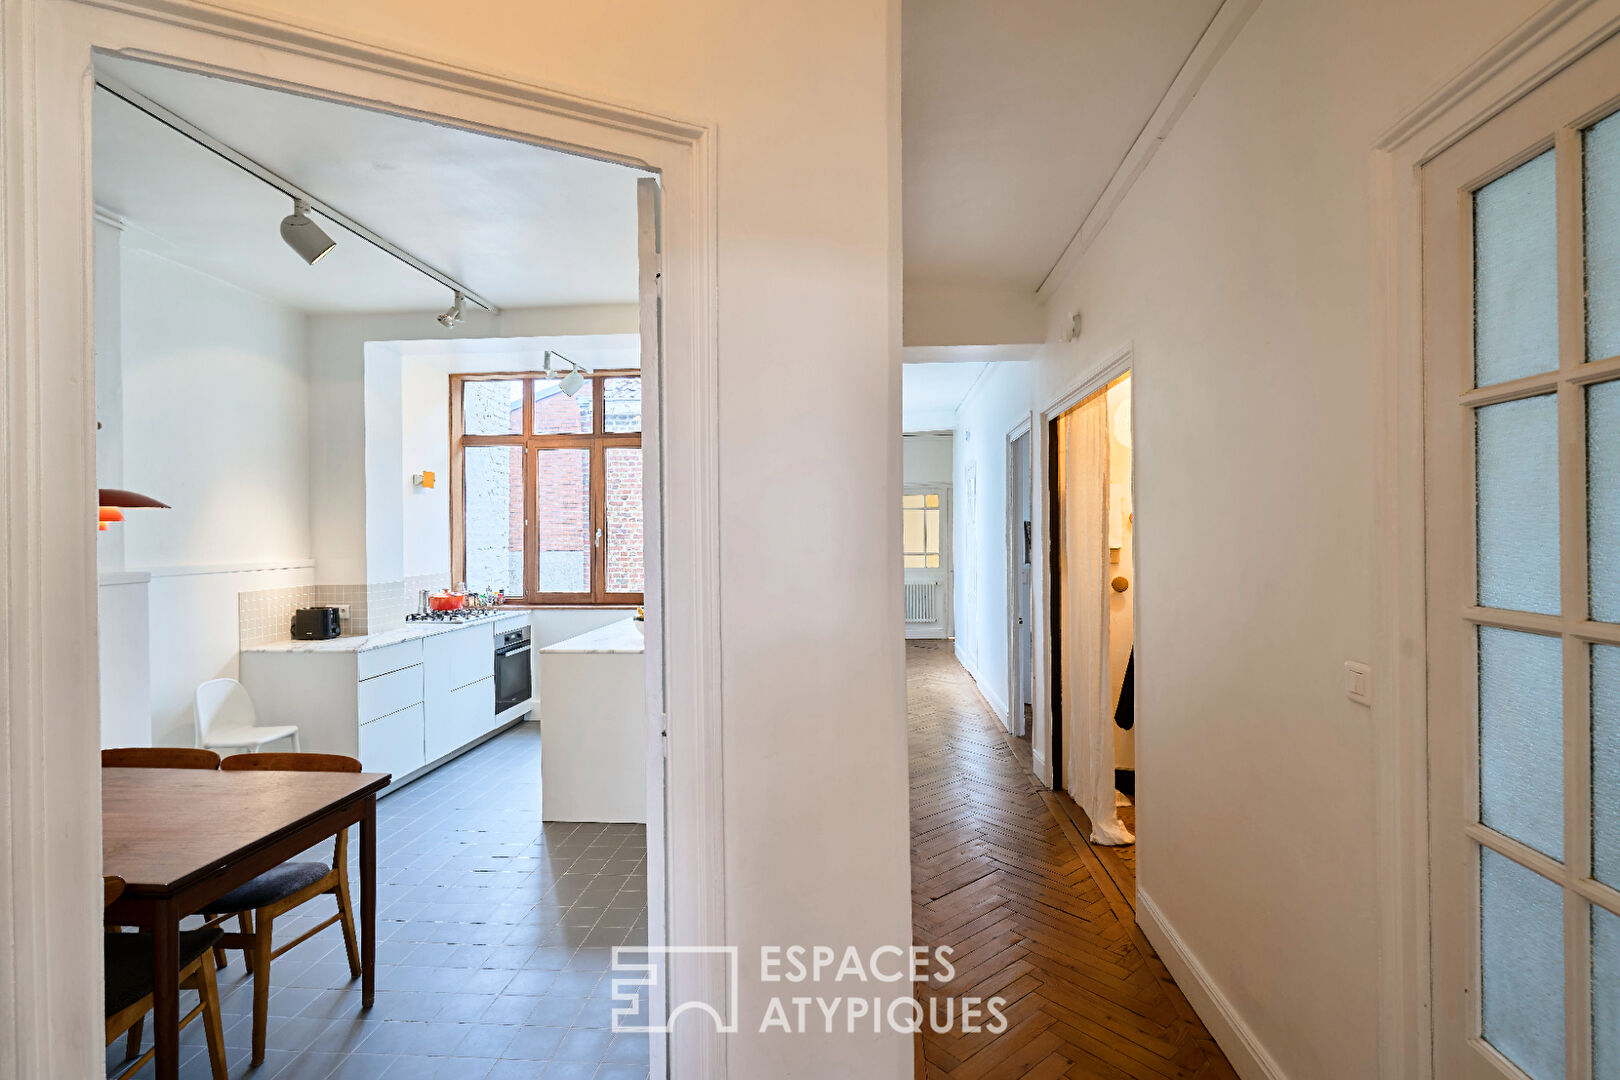 A CORRIDOR APARTMENT IN THE HEART OF LILLE